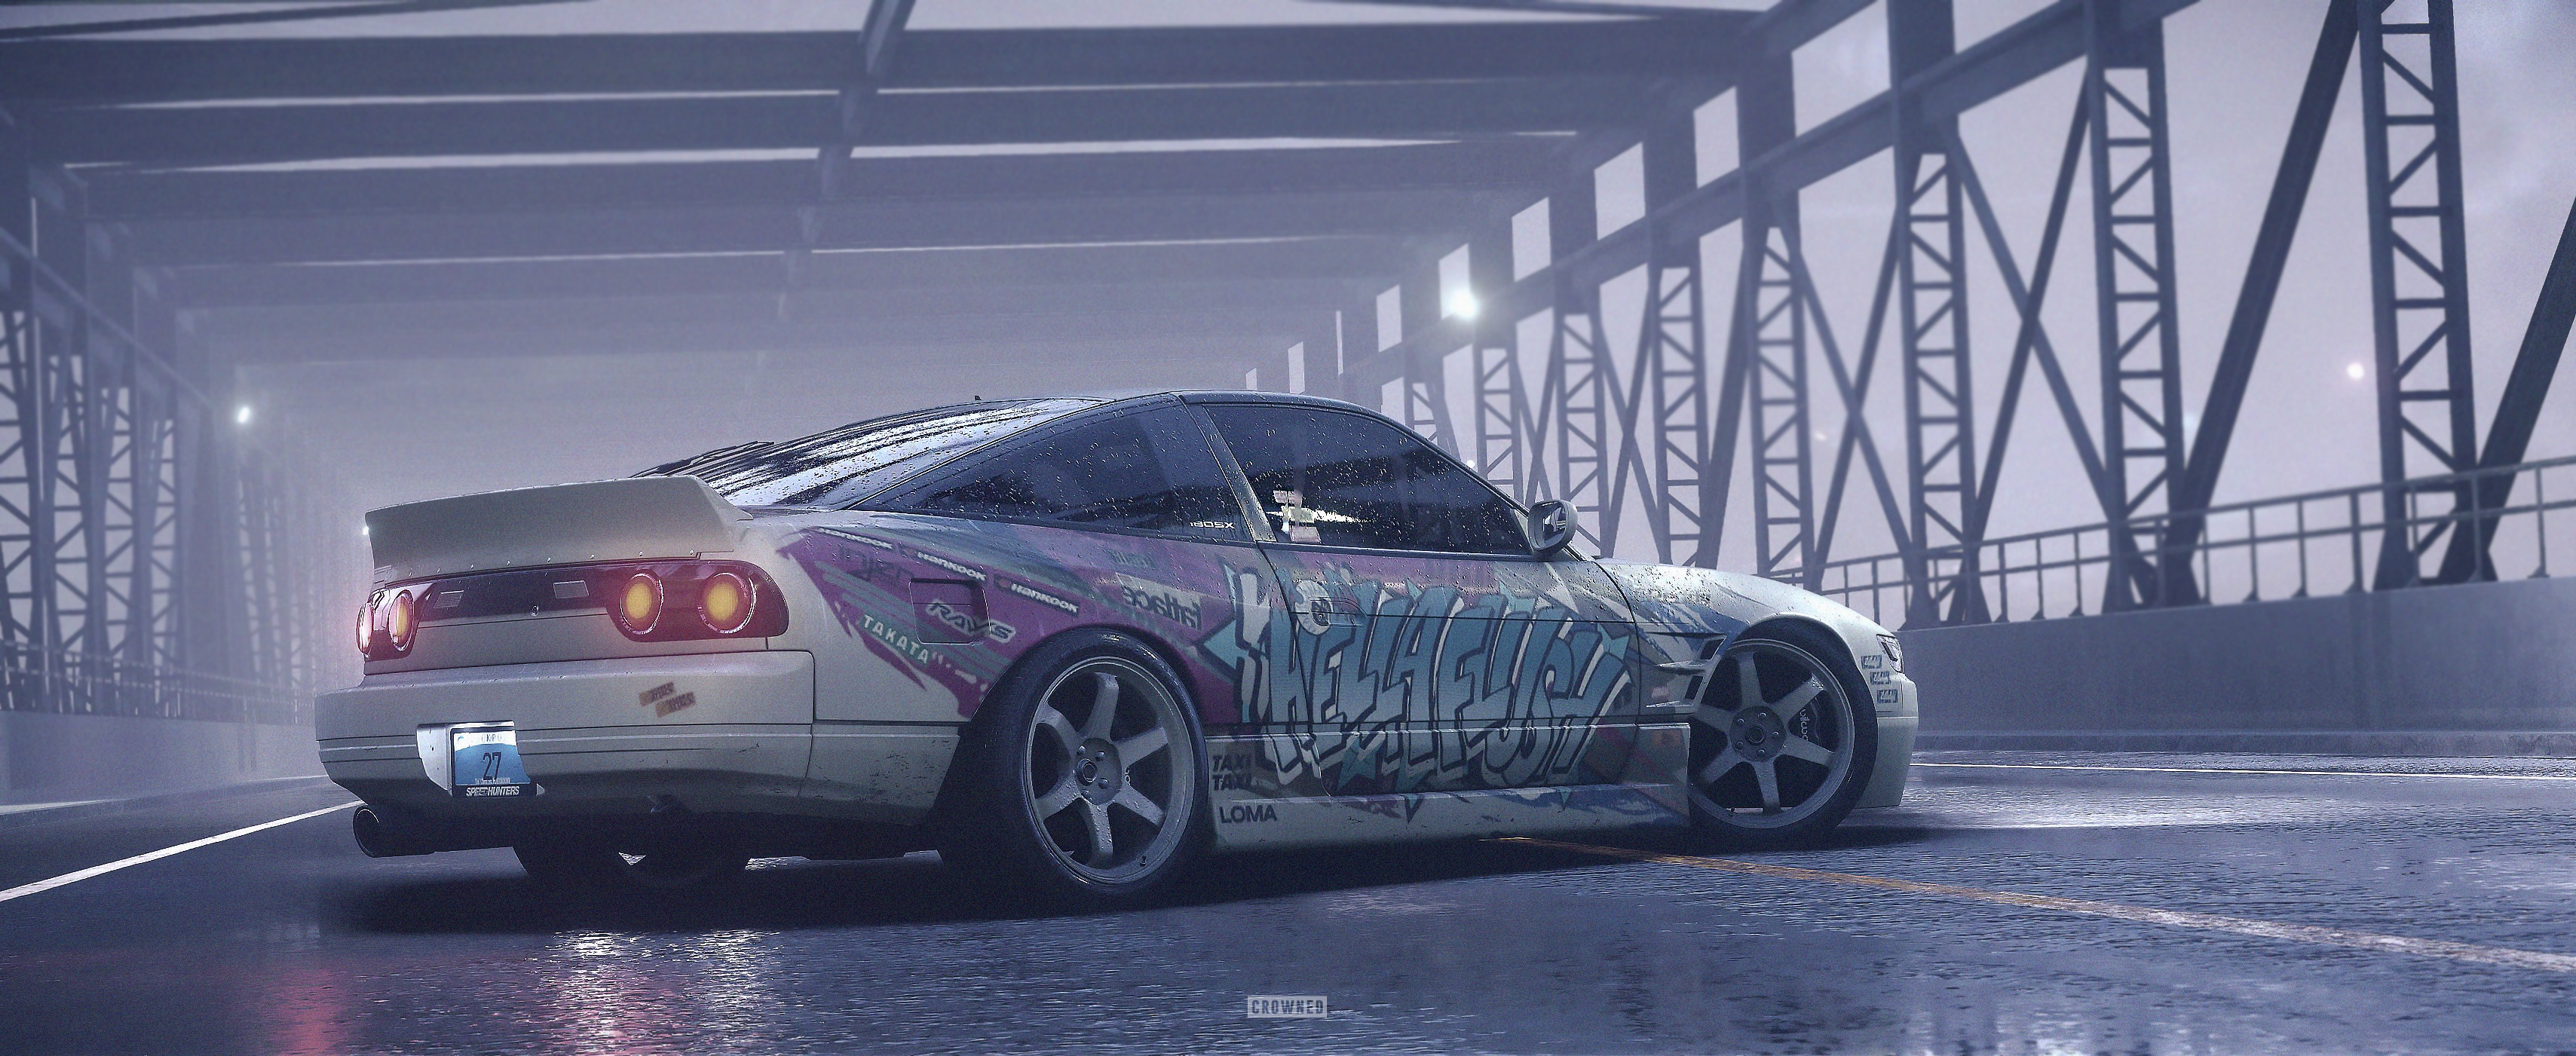 CROWNED Need For Speed Nissan 200SX 3417x1401